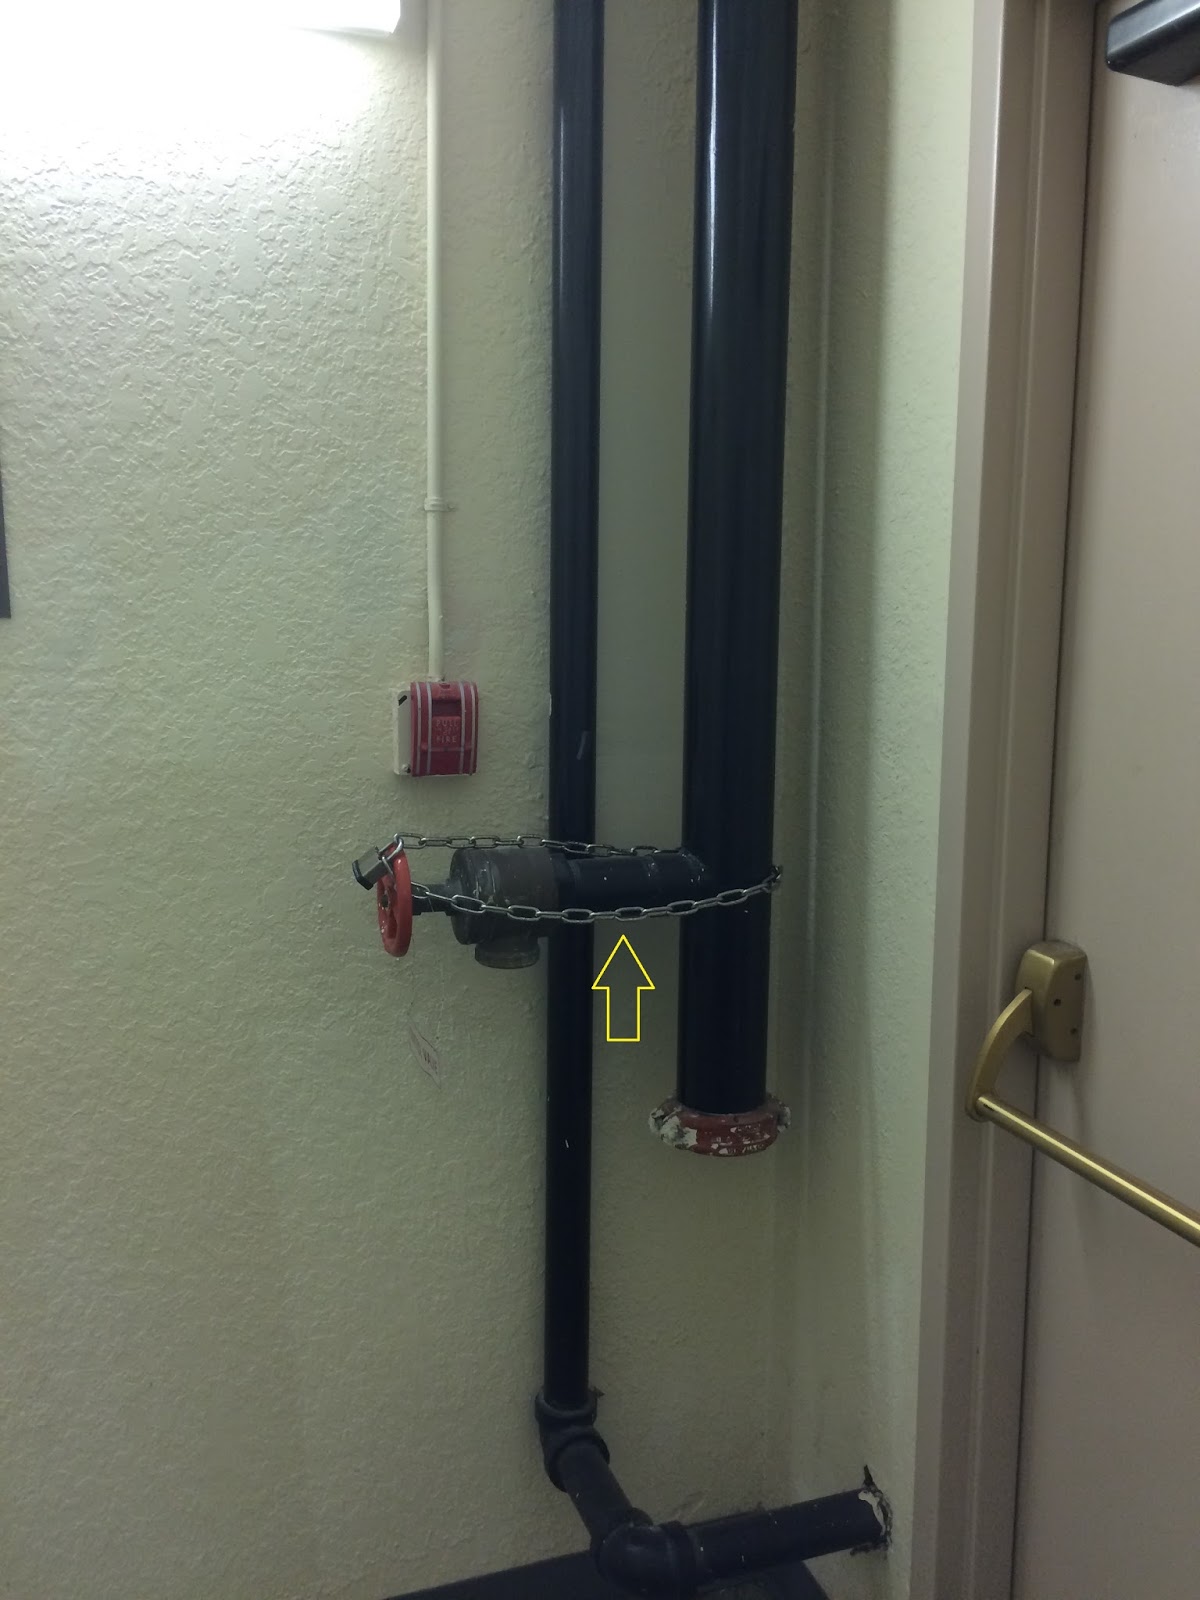 Fire Protection Deficiencies: On Standpipes1200 x 1600